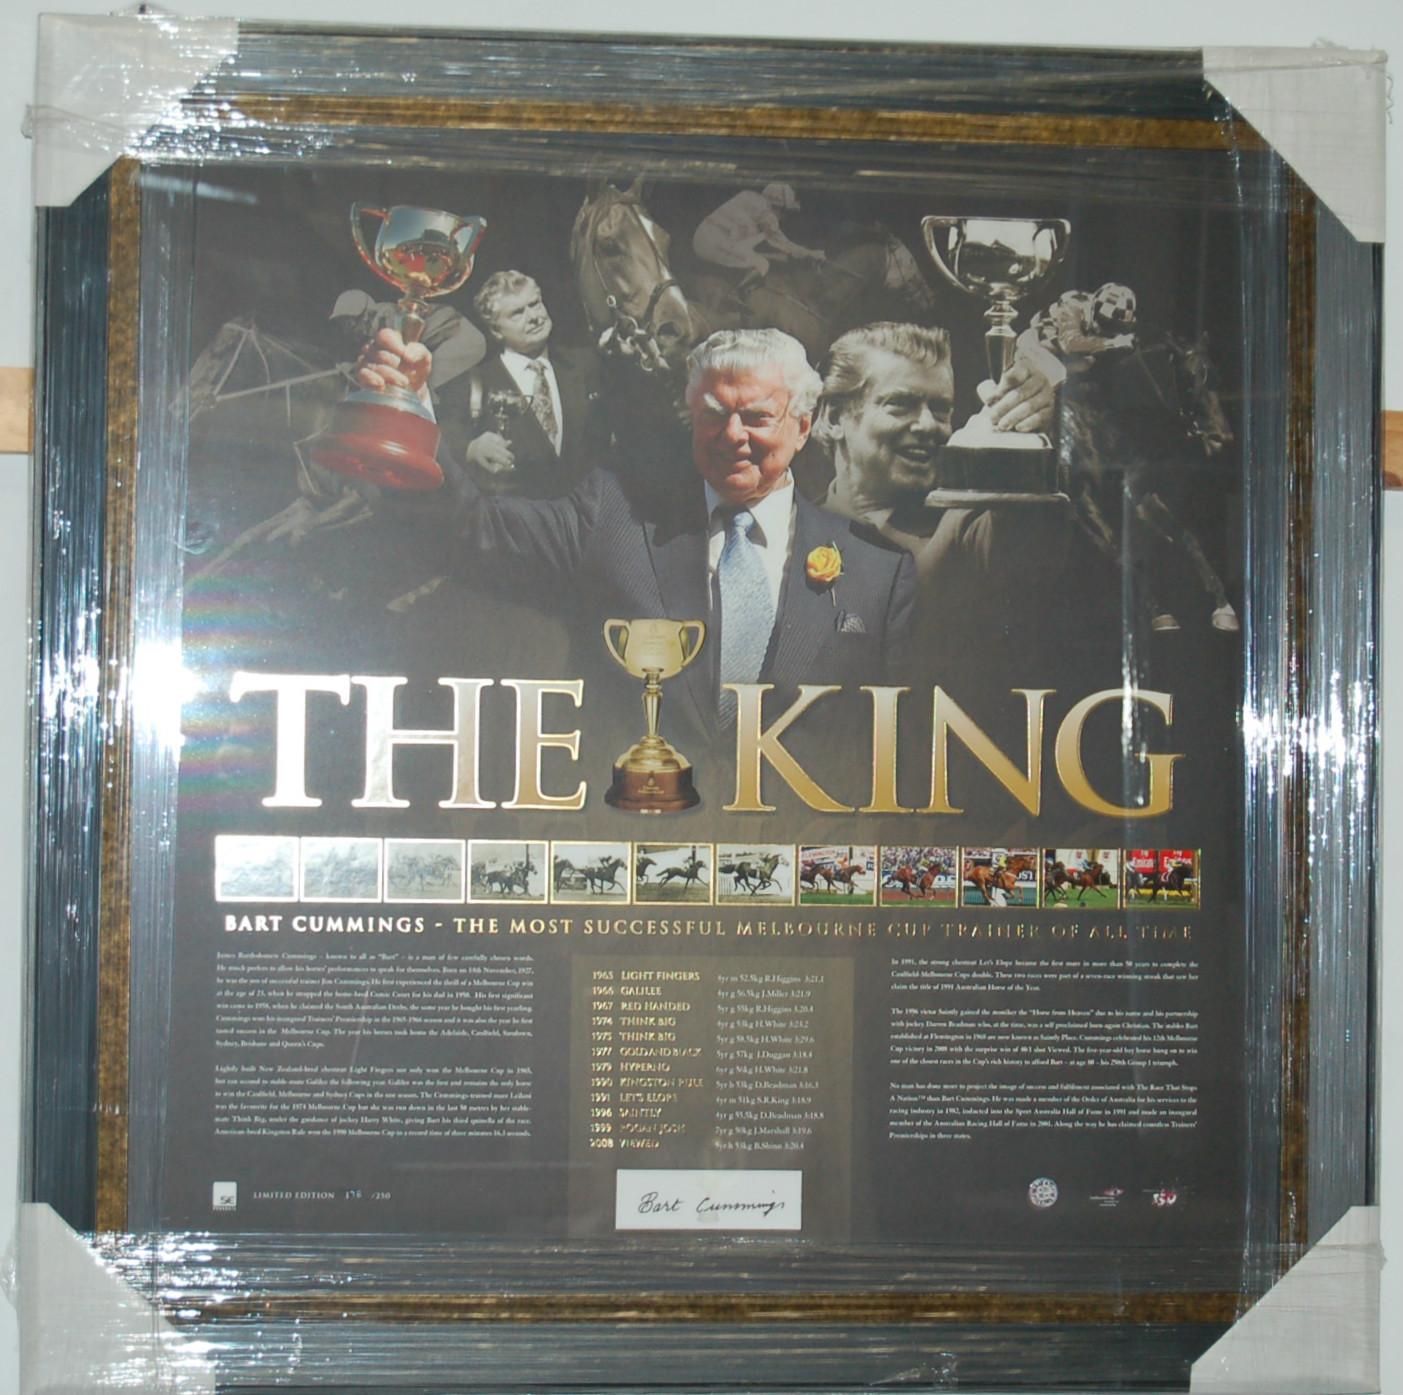 Horse Racing – Bart Cummings Signed “The King” Litho...